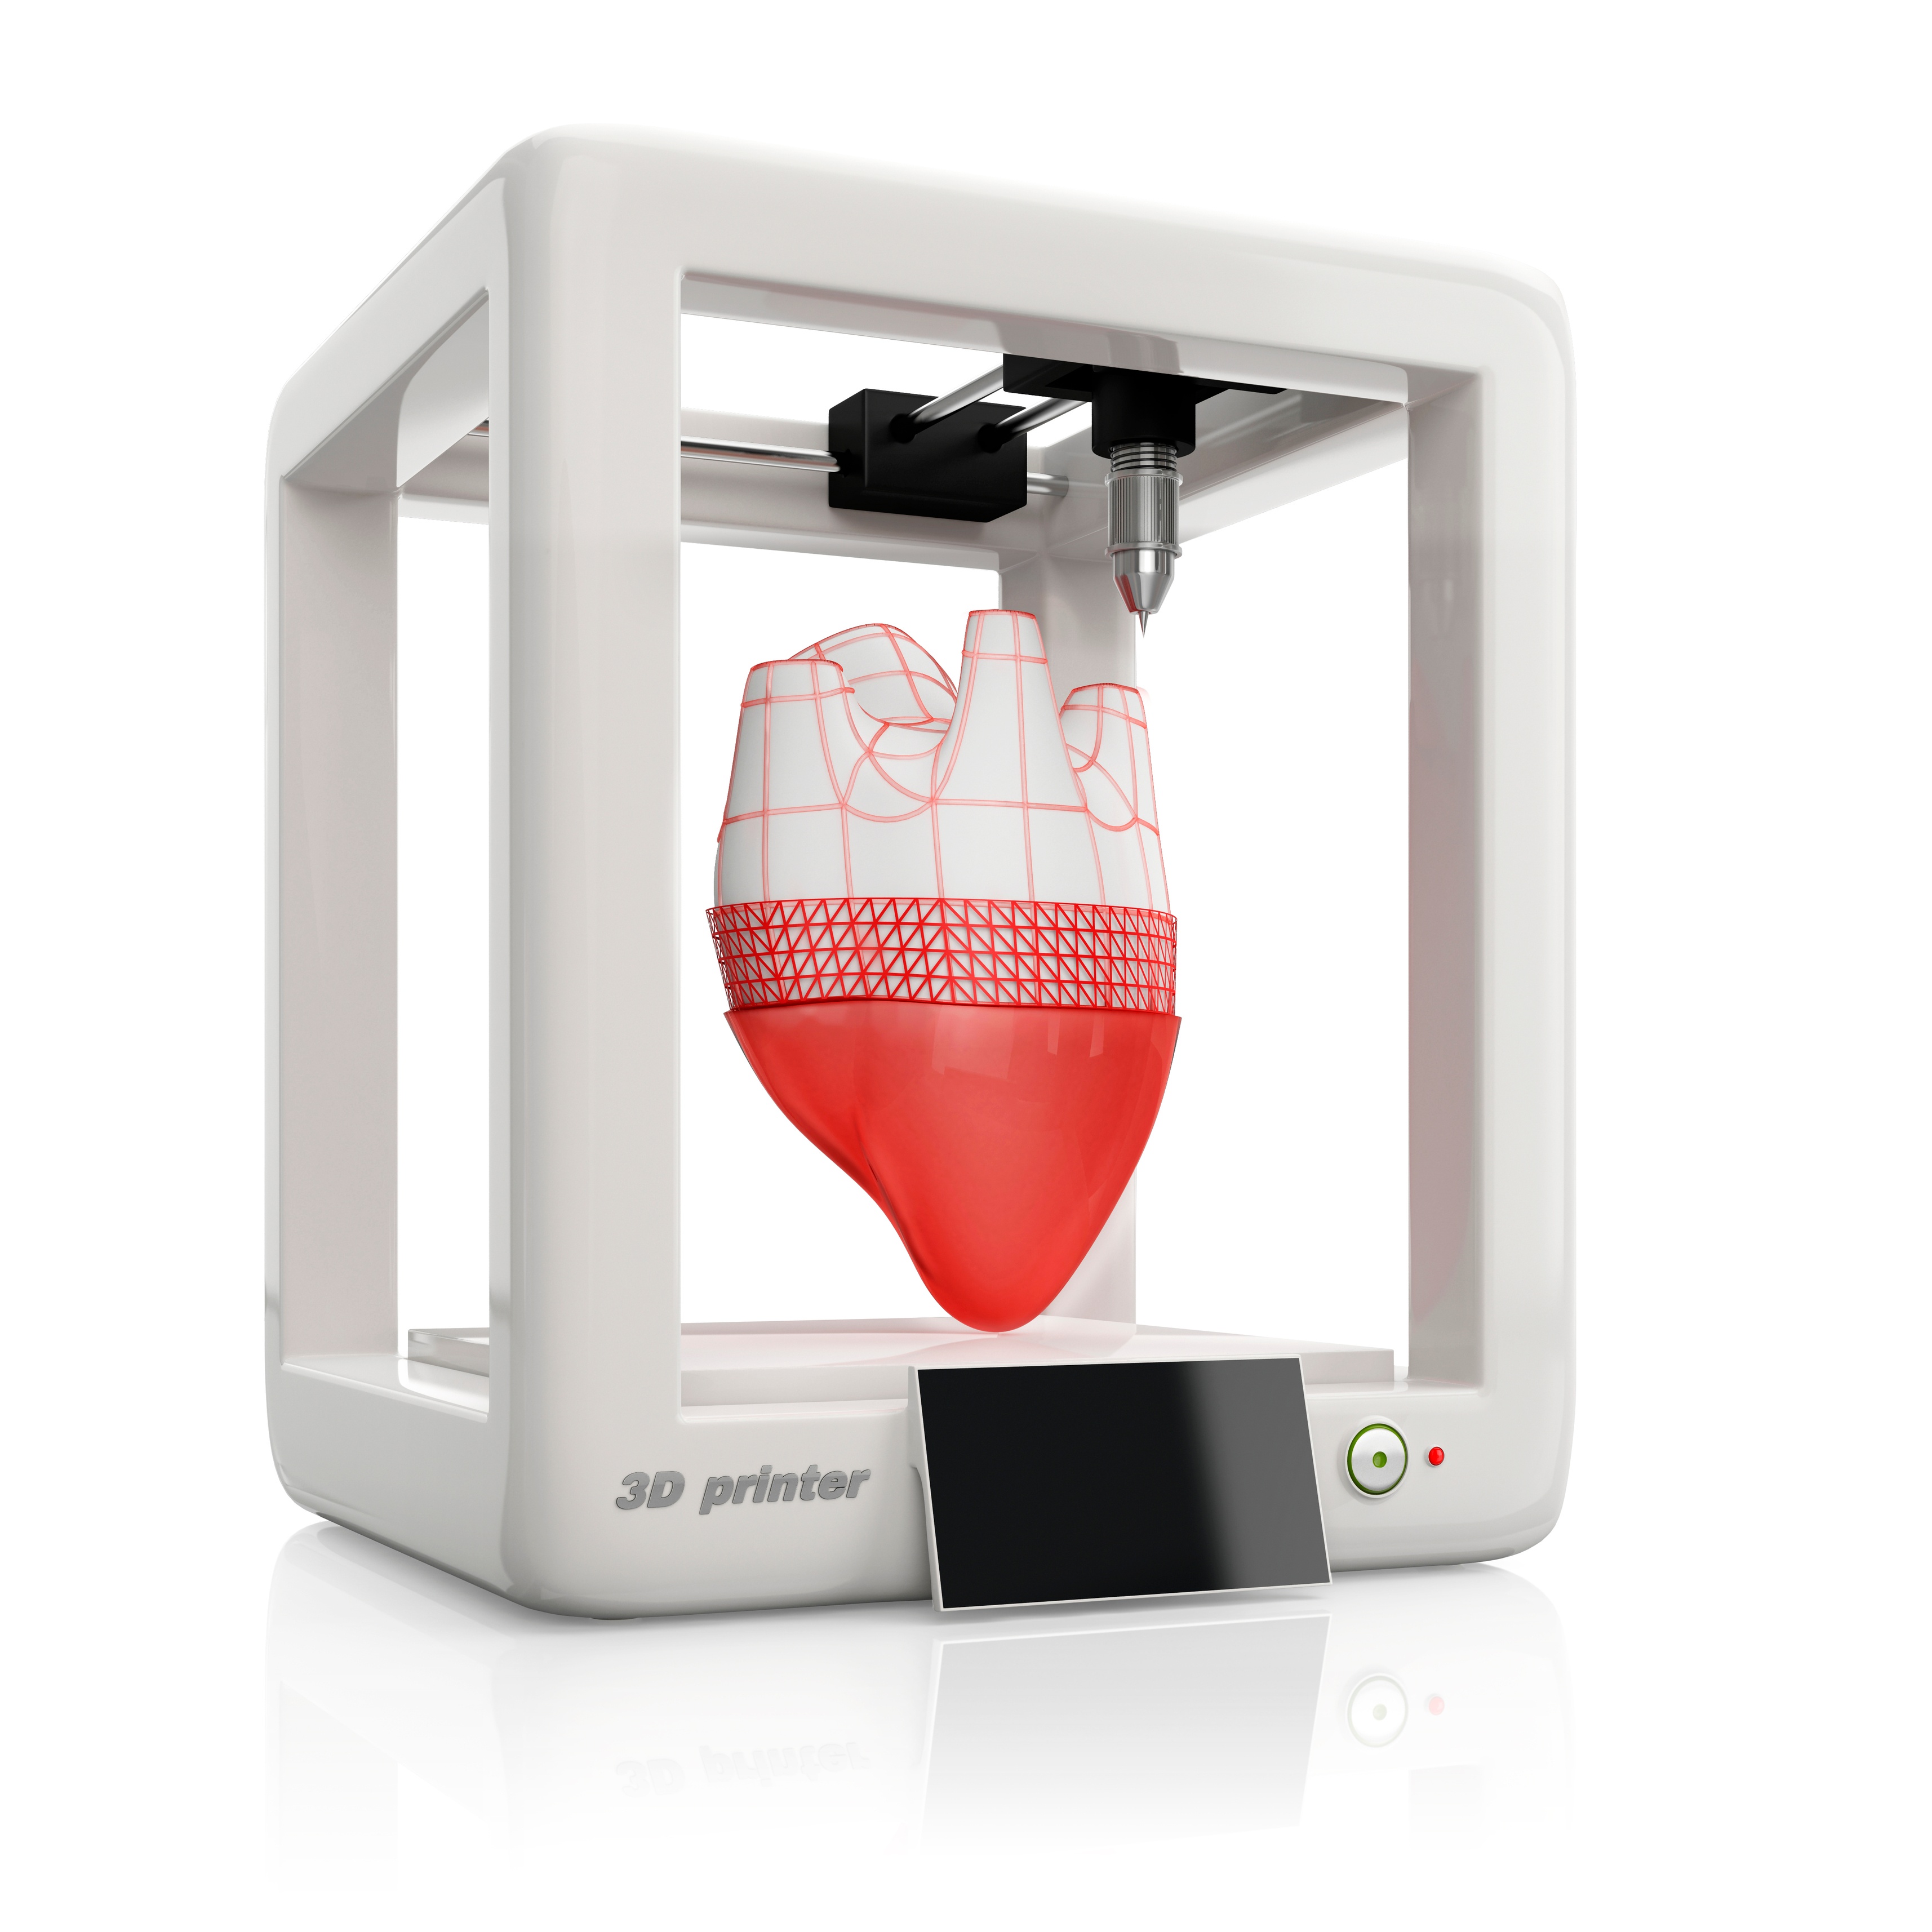 Bioprinting: The Future is Now